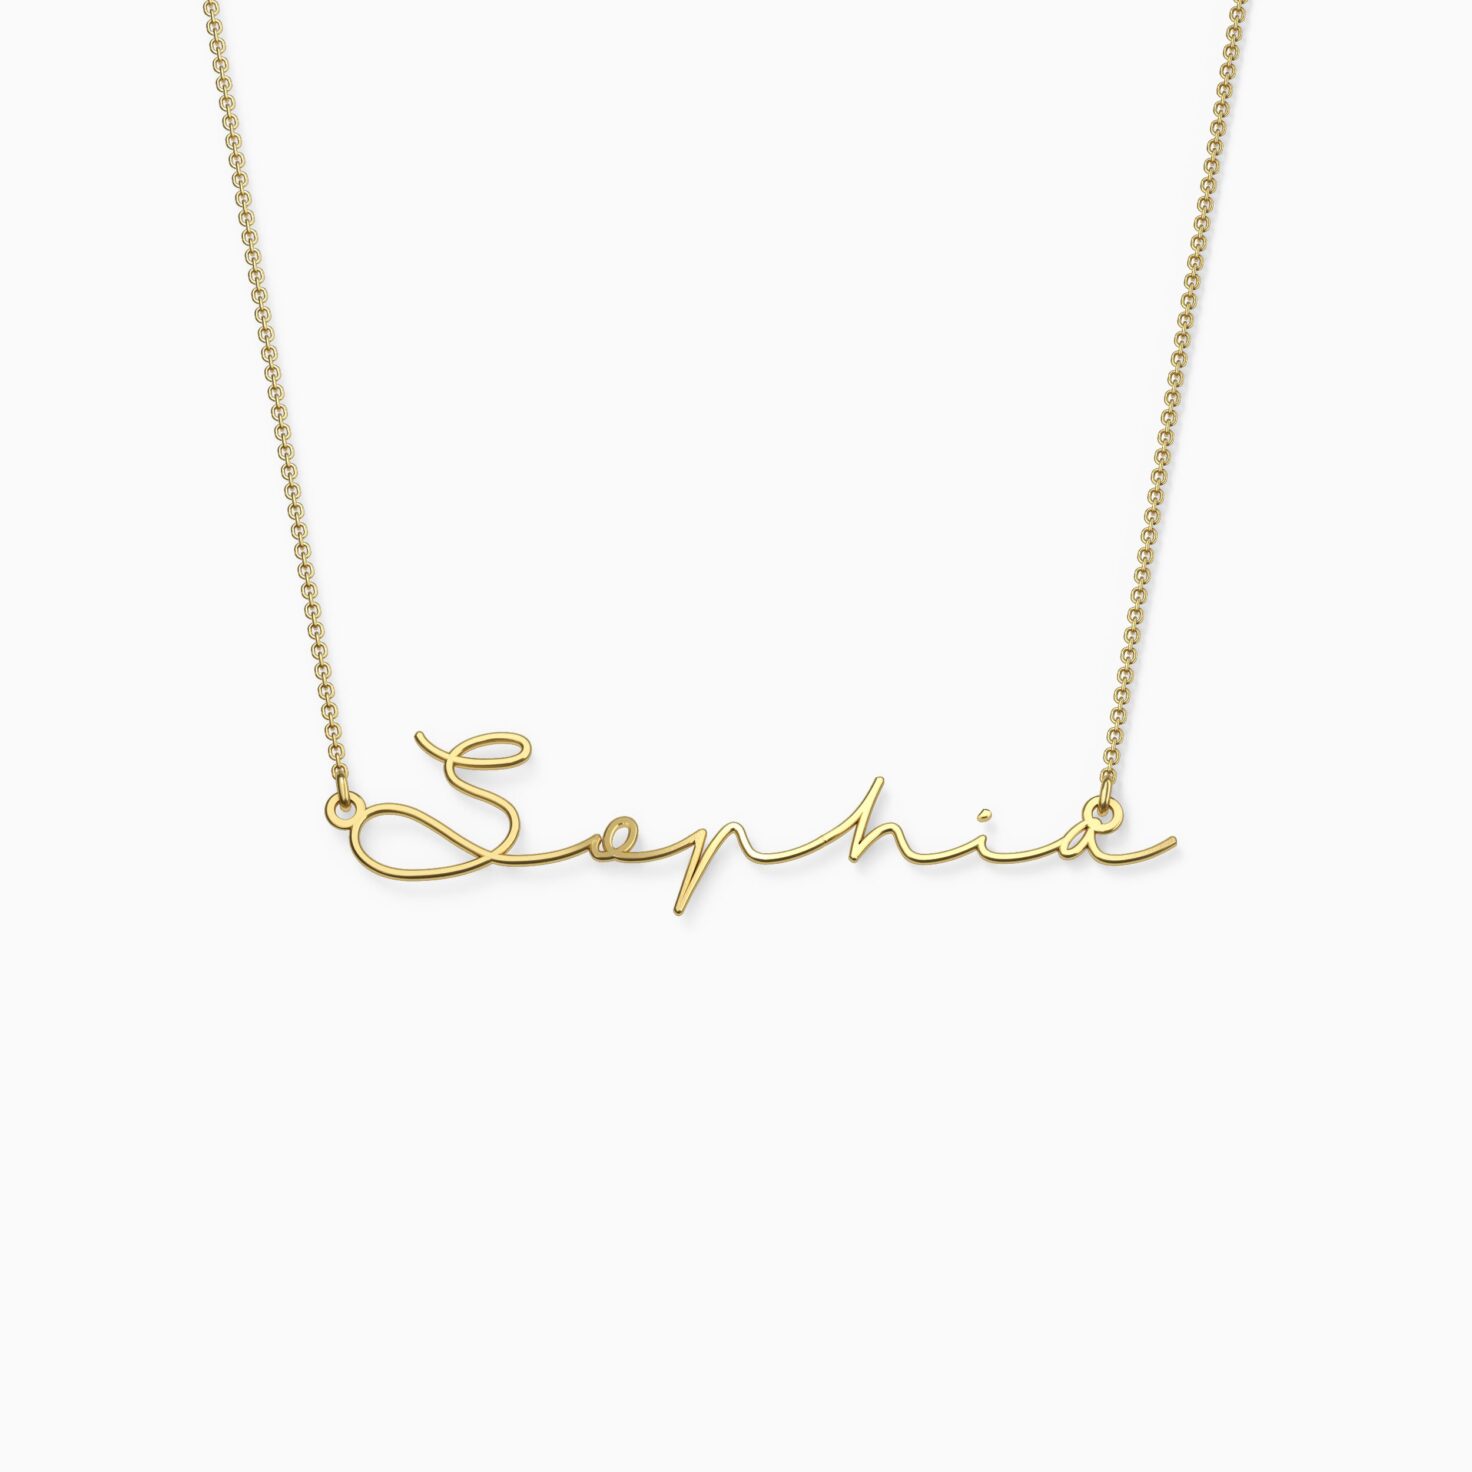 Don’t Miss Your Chance To Get A Super Pretty Name Necklace For Less ...